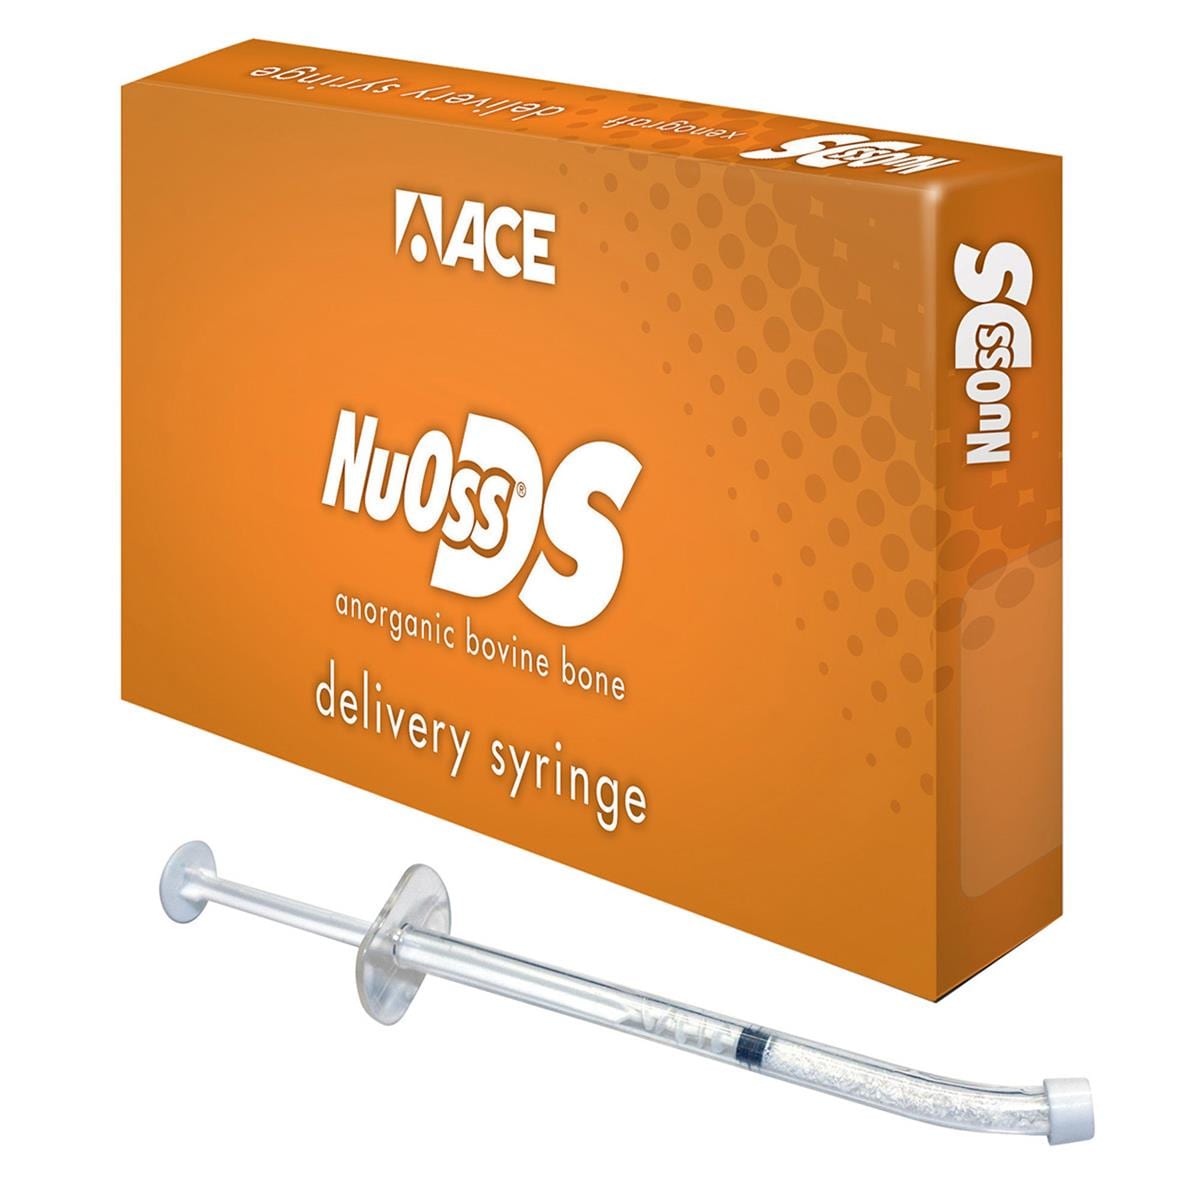 NuOss DS Delivery Syringe 0.25-1mm 0.50cc